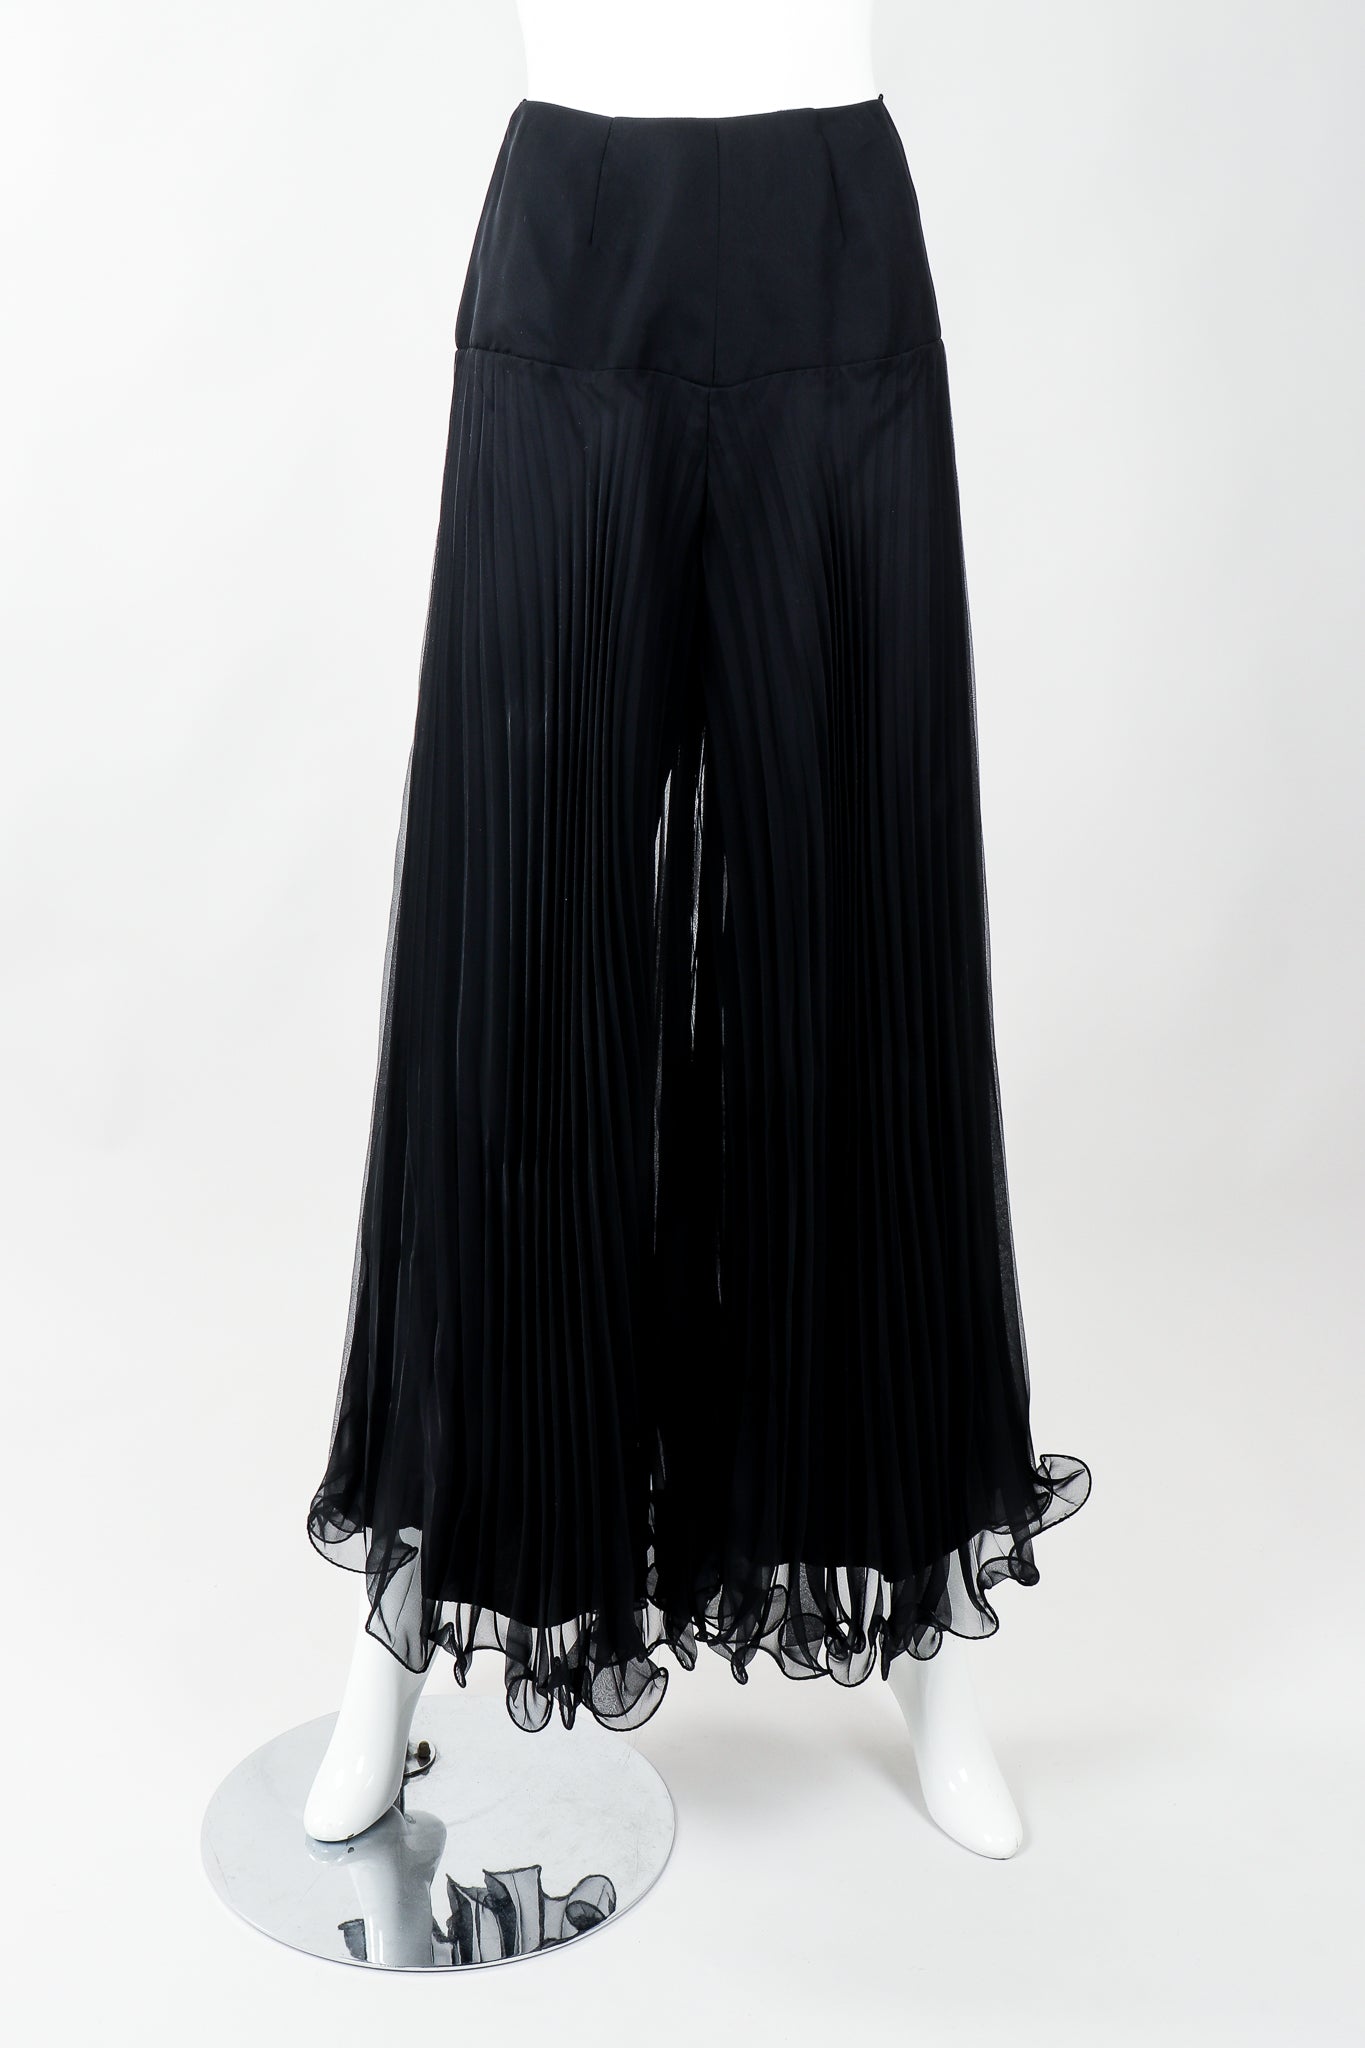 Vintage Bullocks Wilshire Pleated Chiffon Palazzo Pant on Mannequin at Recess